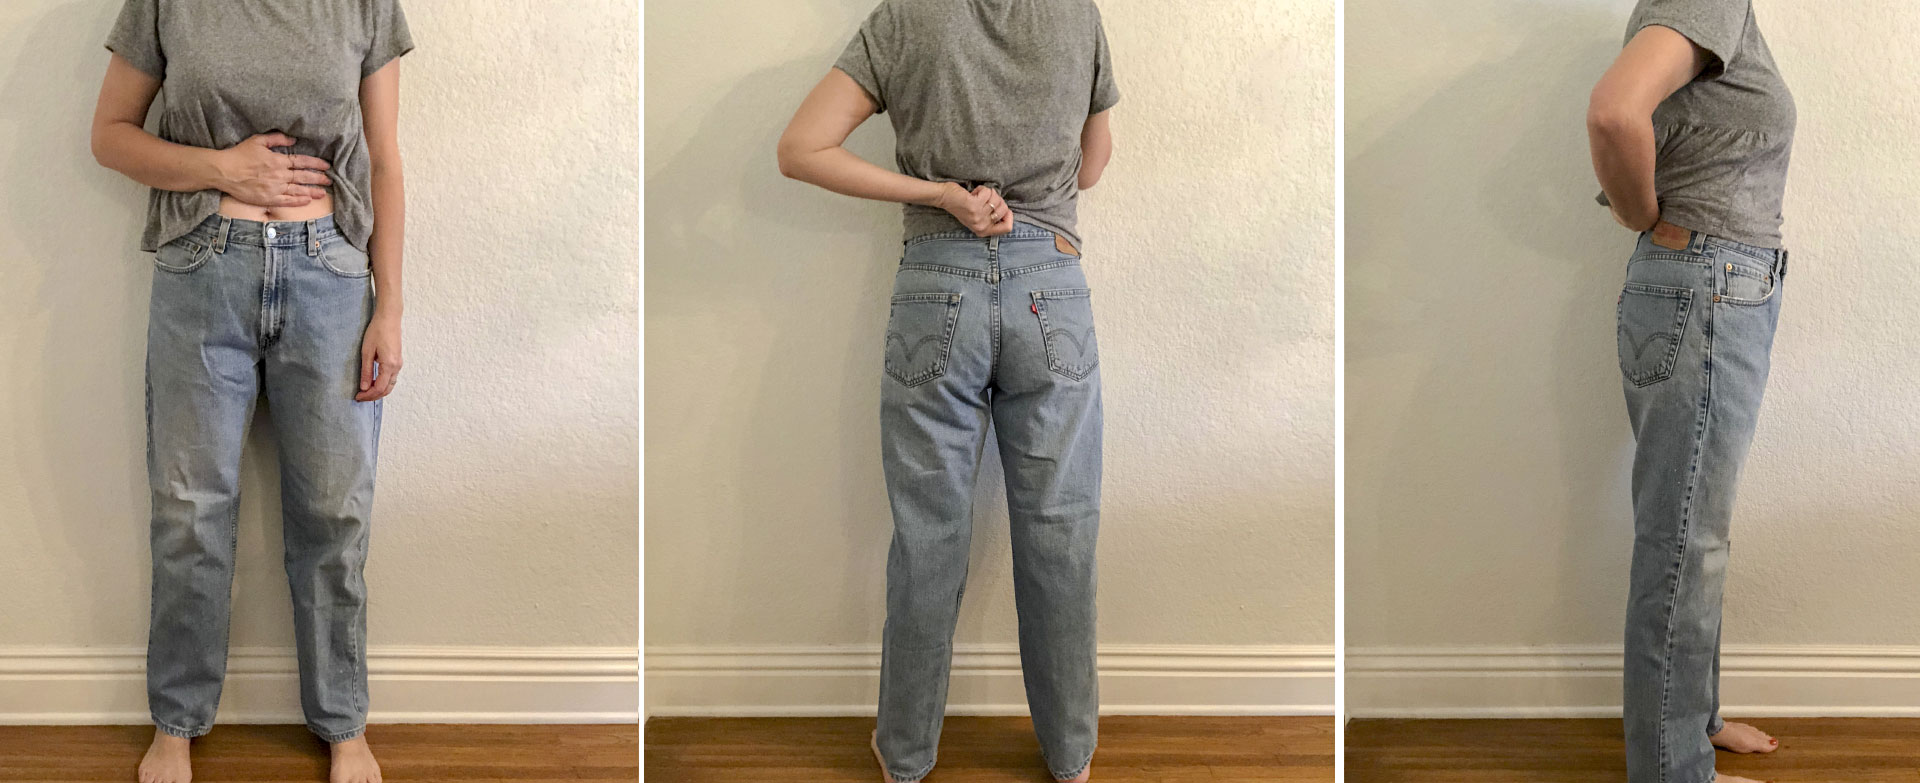 levi's size 12 waist in inches